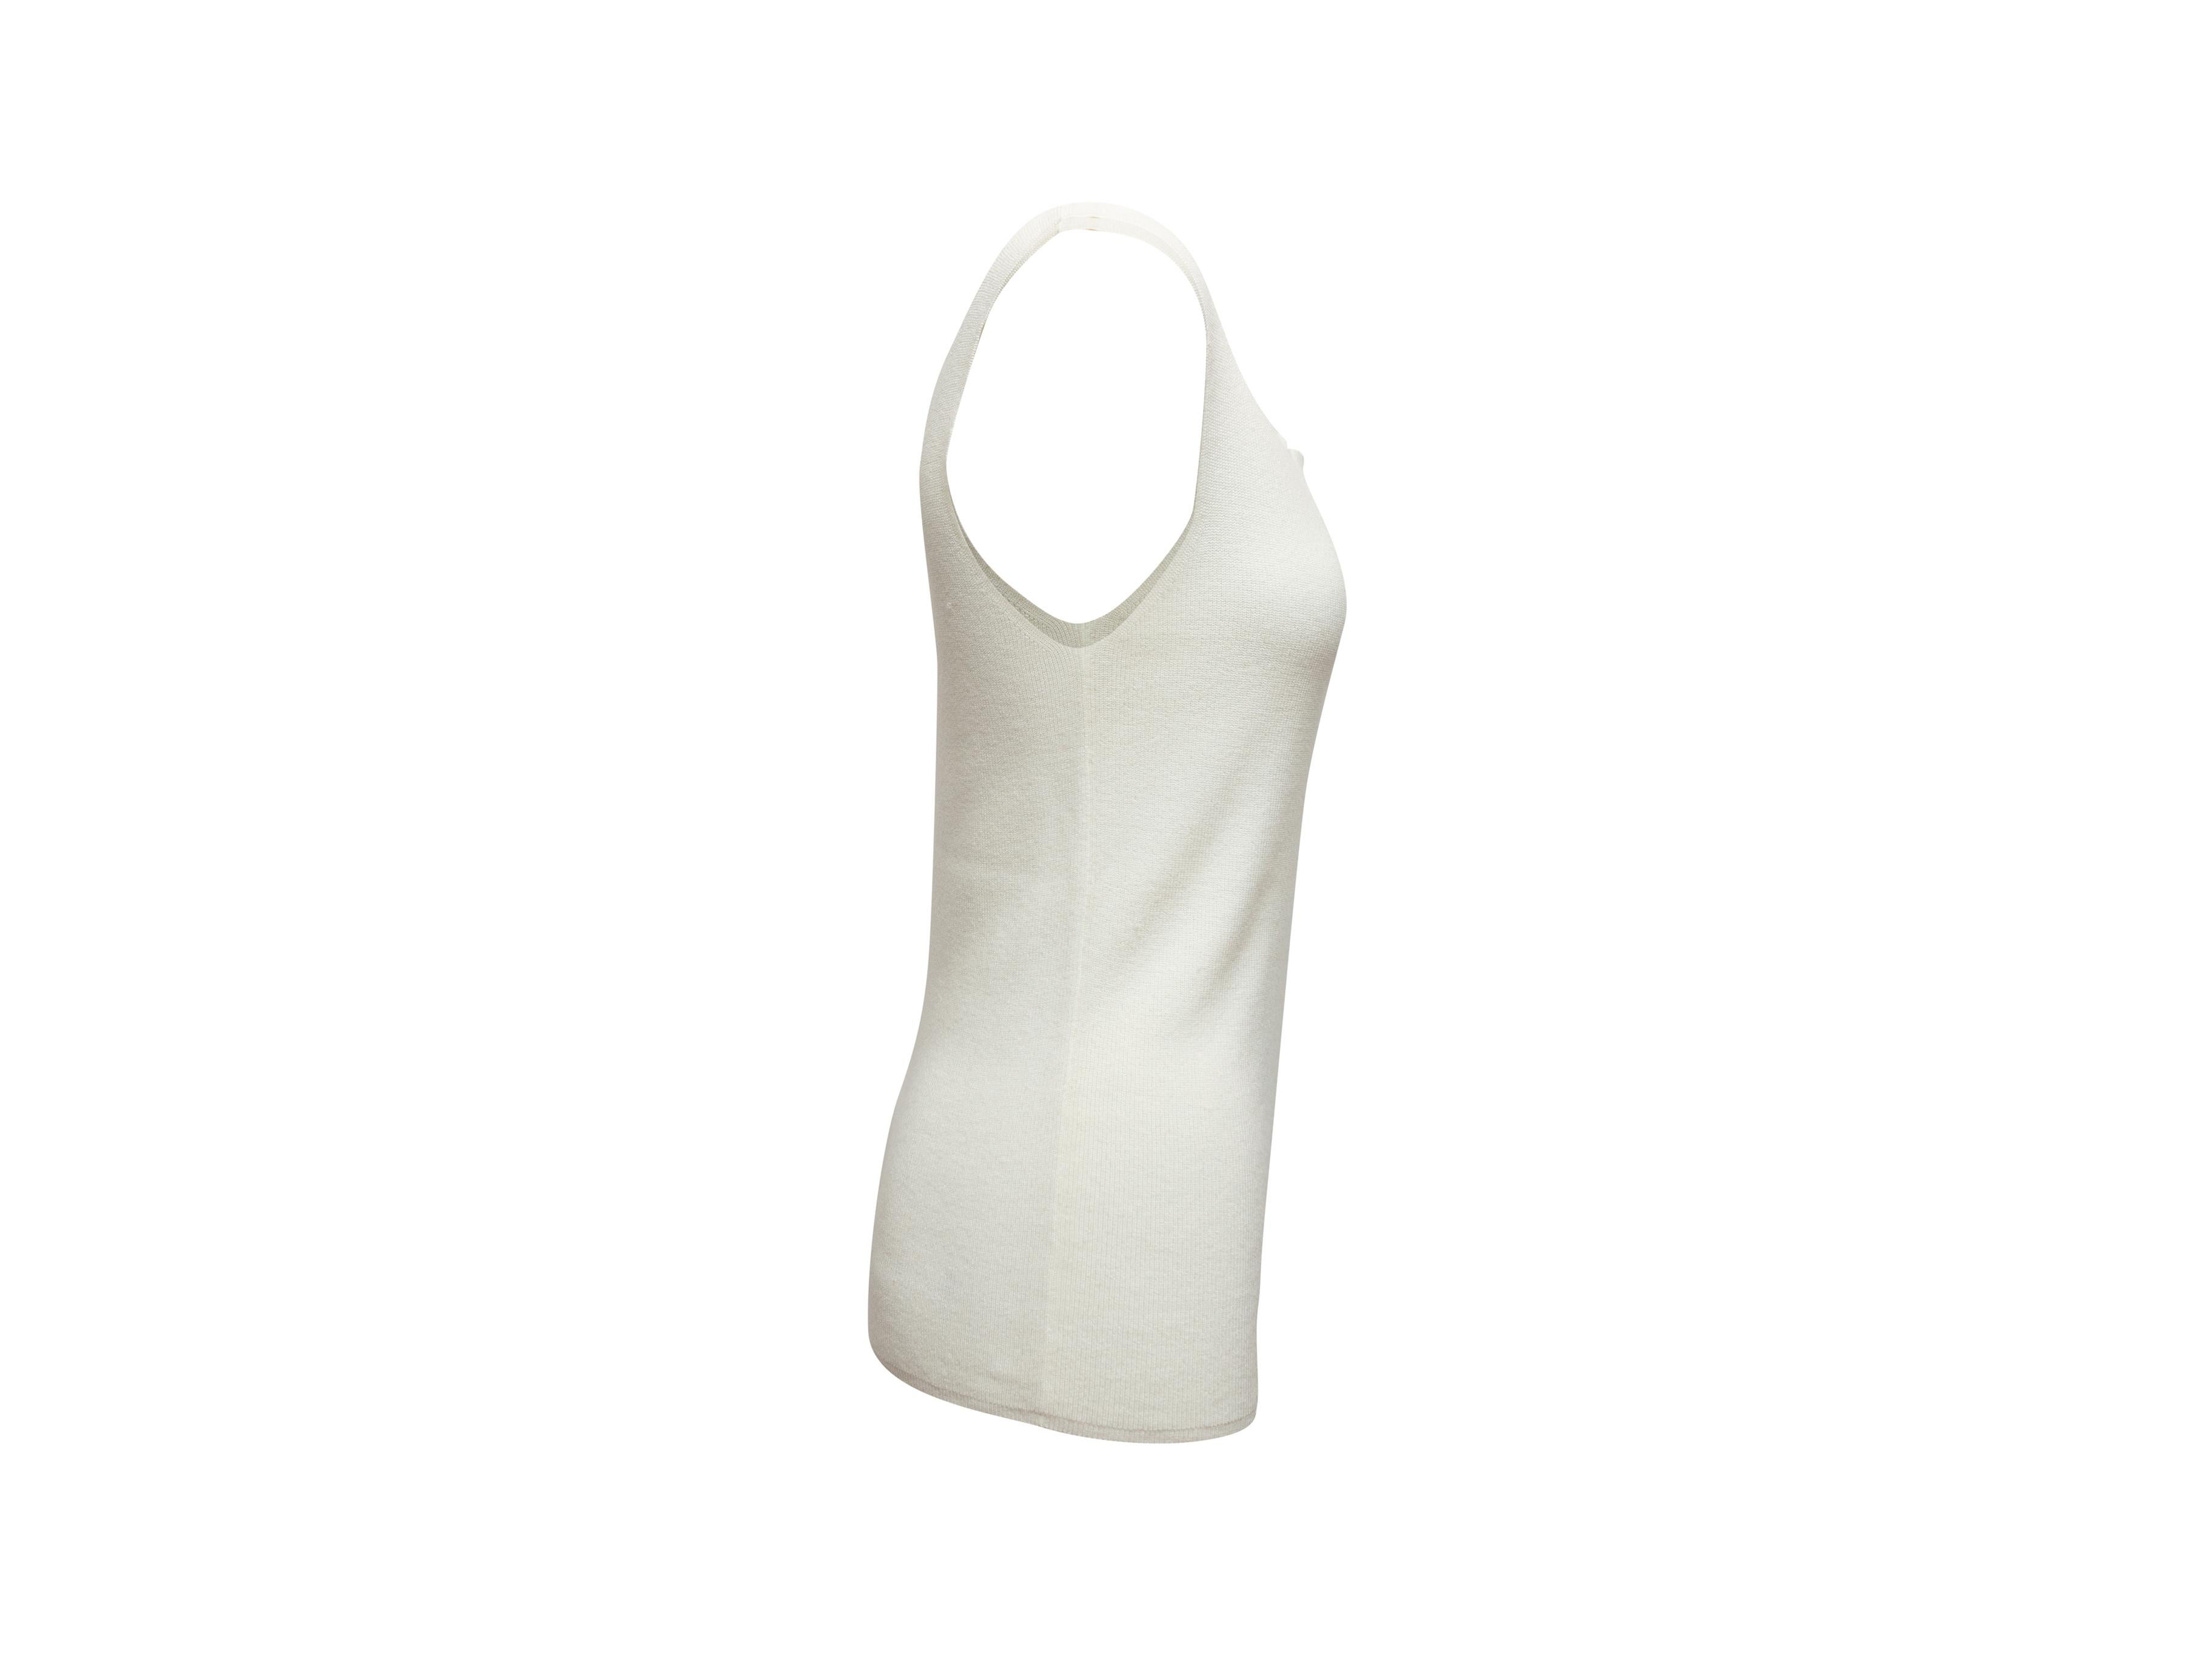 Product details: White sleeveless knit top by Chanel. From the Spring 2005 Collection. Scoop neckline. Designer size 48. 29